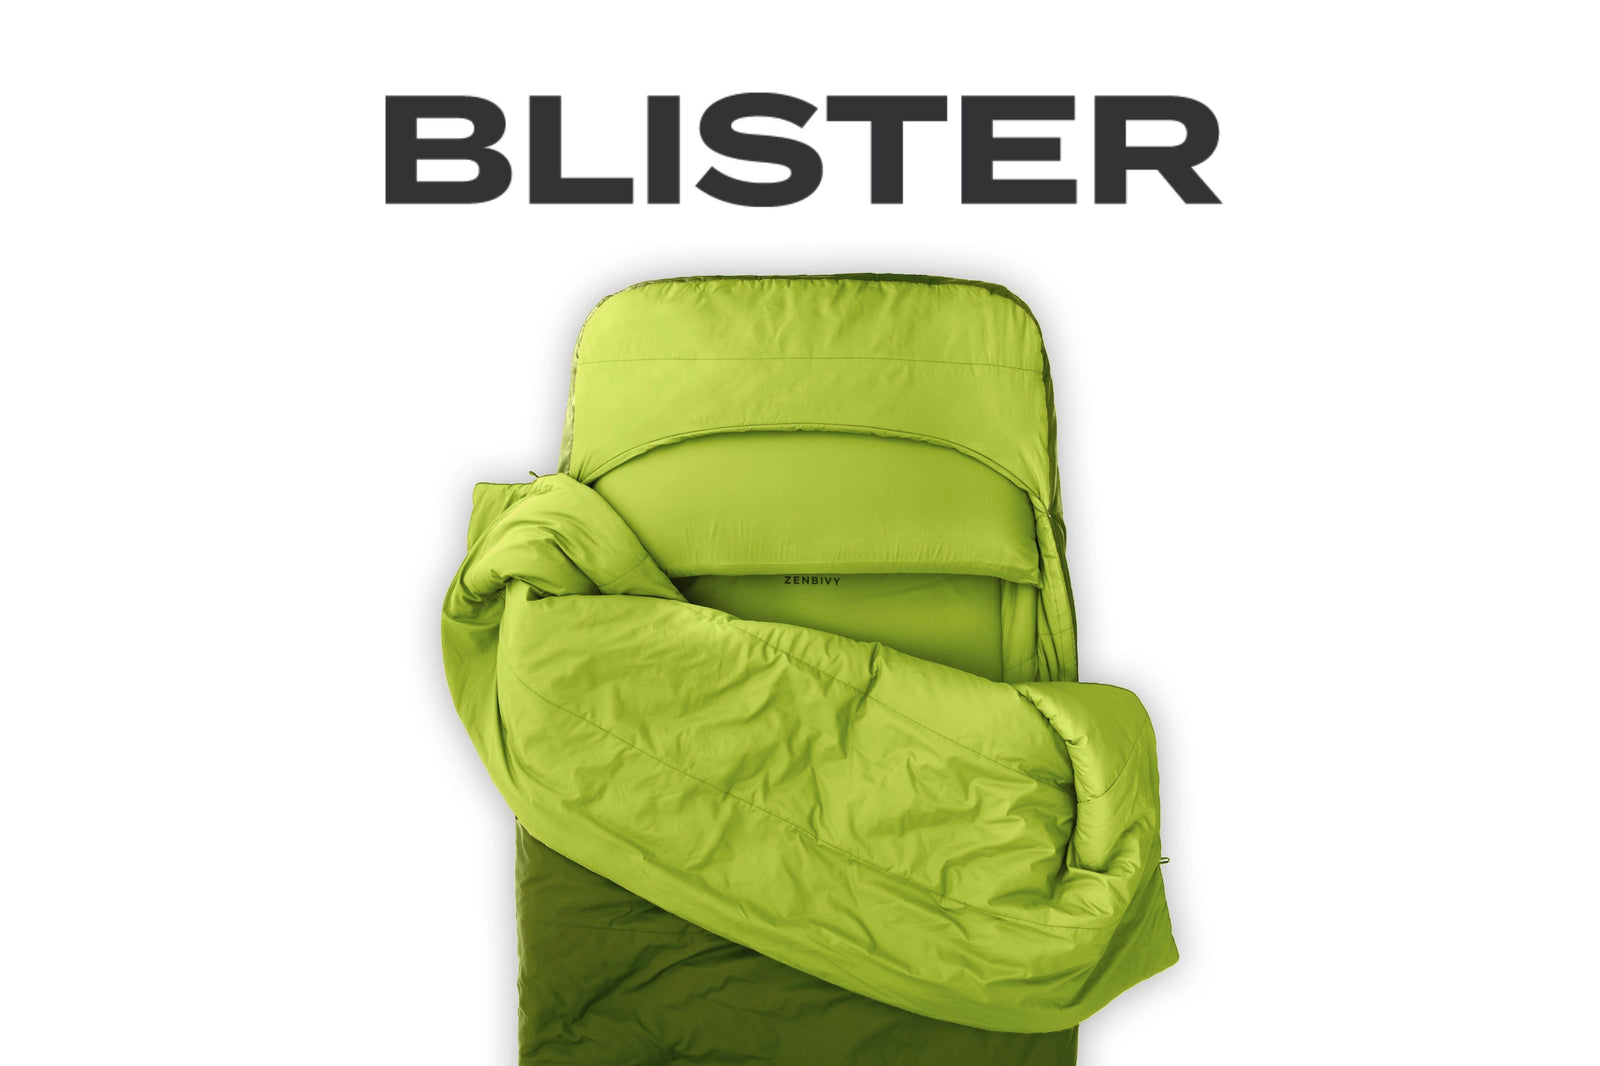 PRESS: Blister includes the MotoBed™ in August roundup